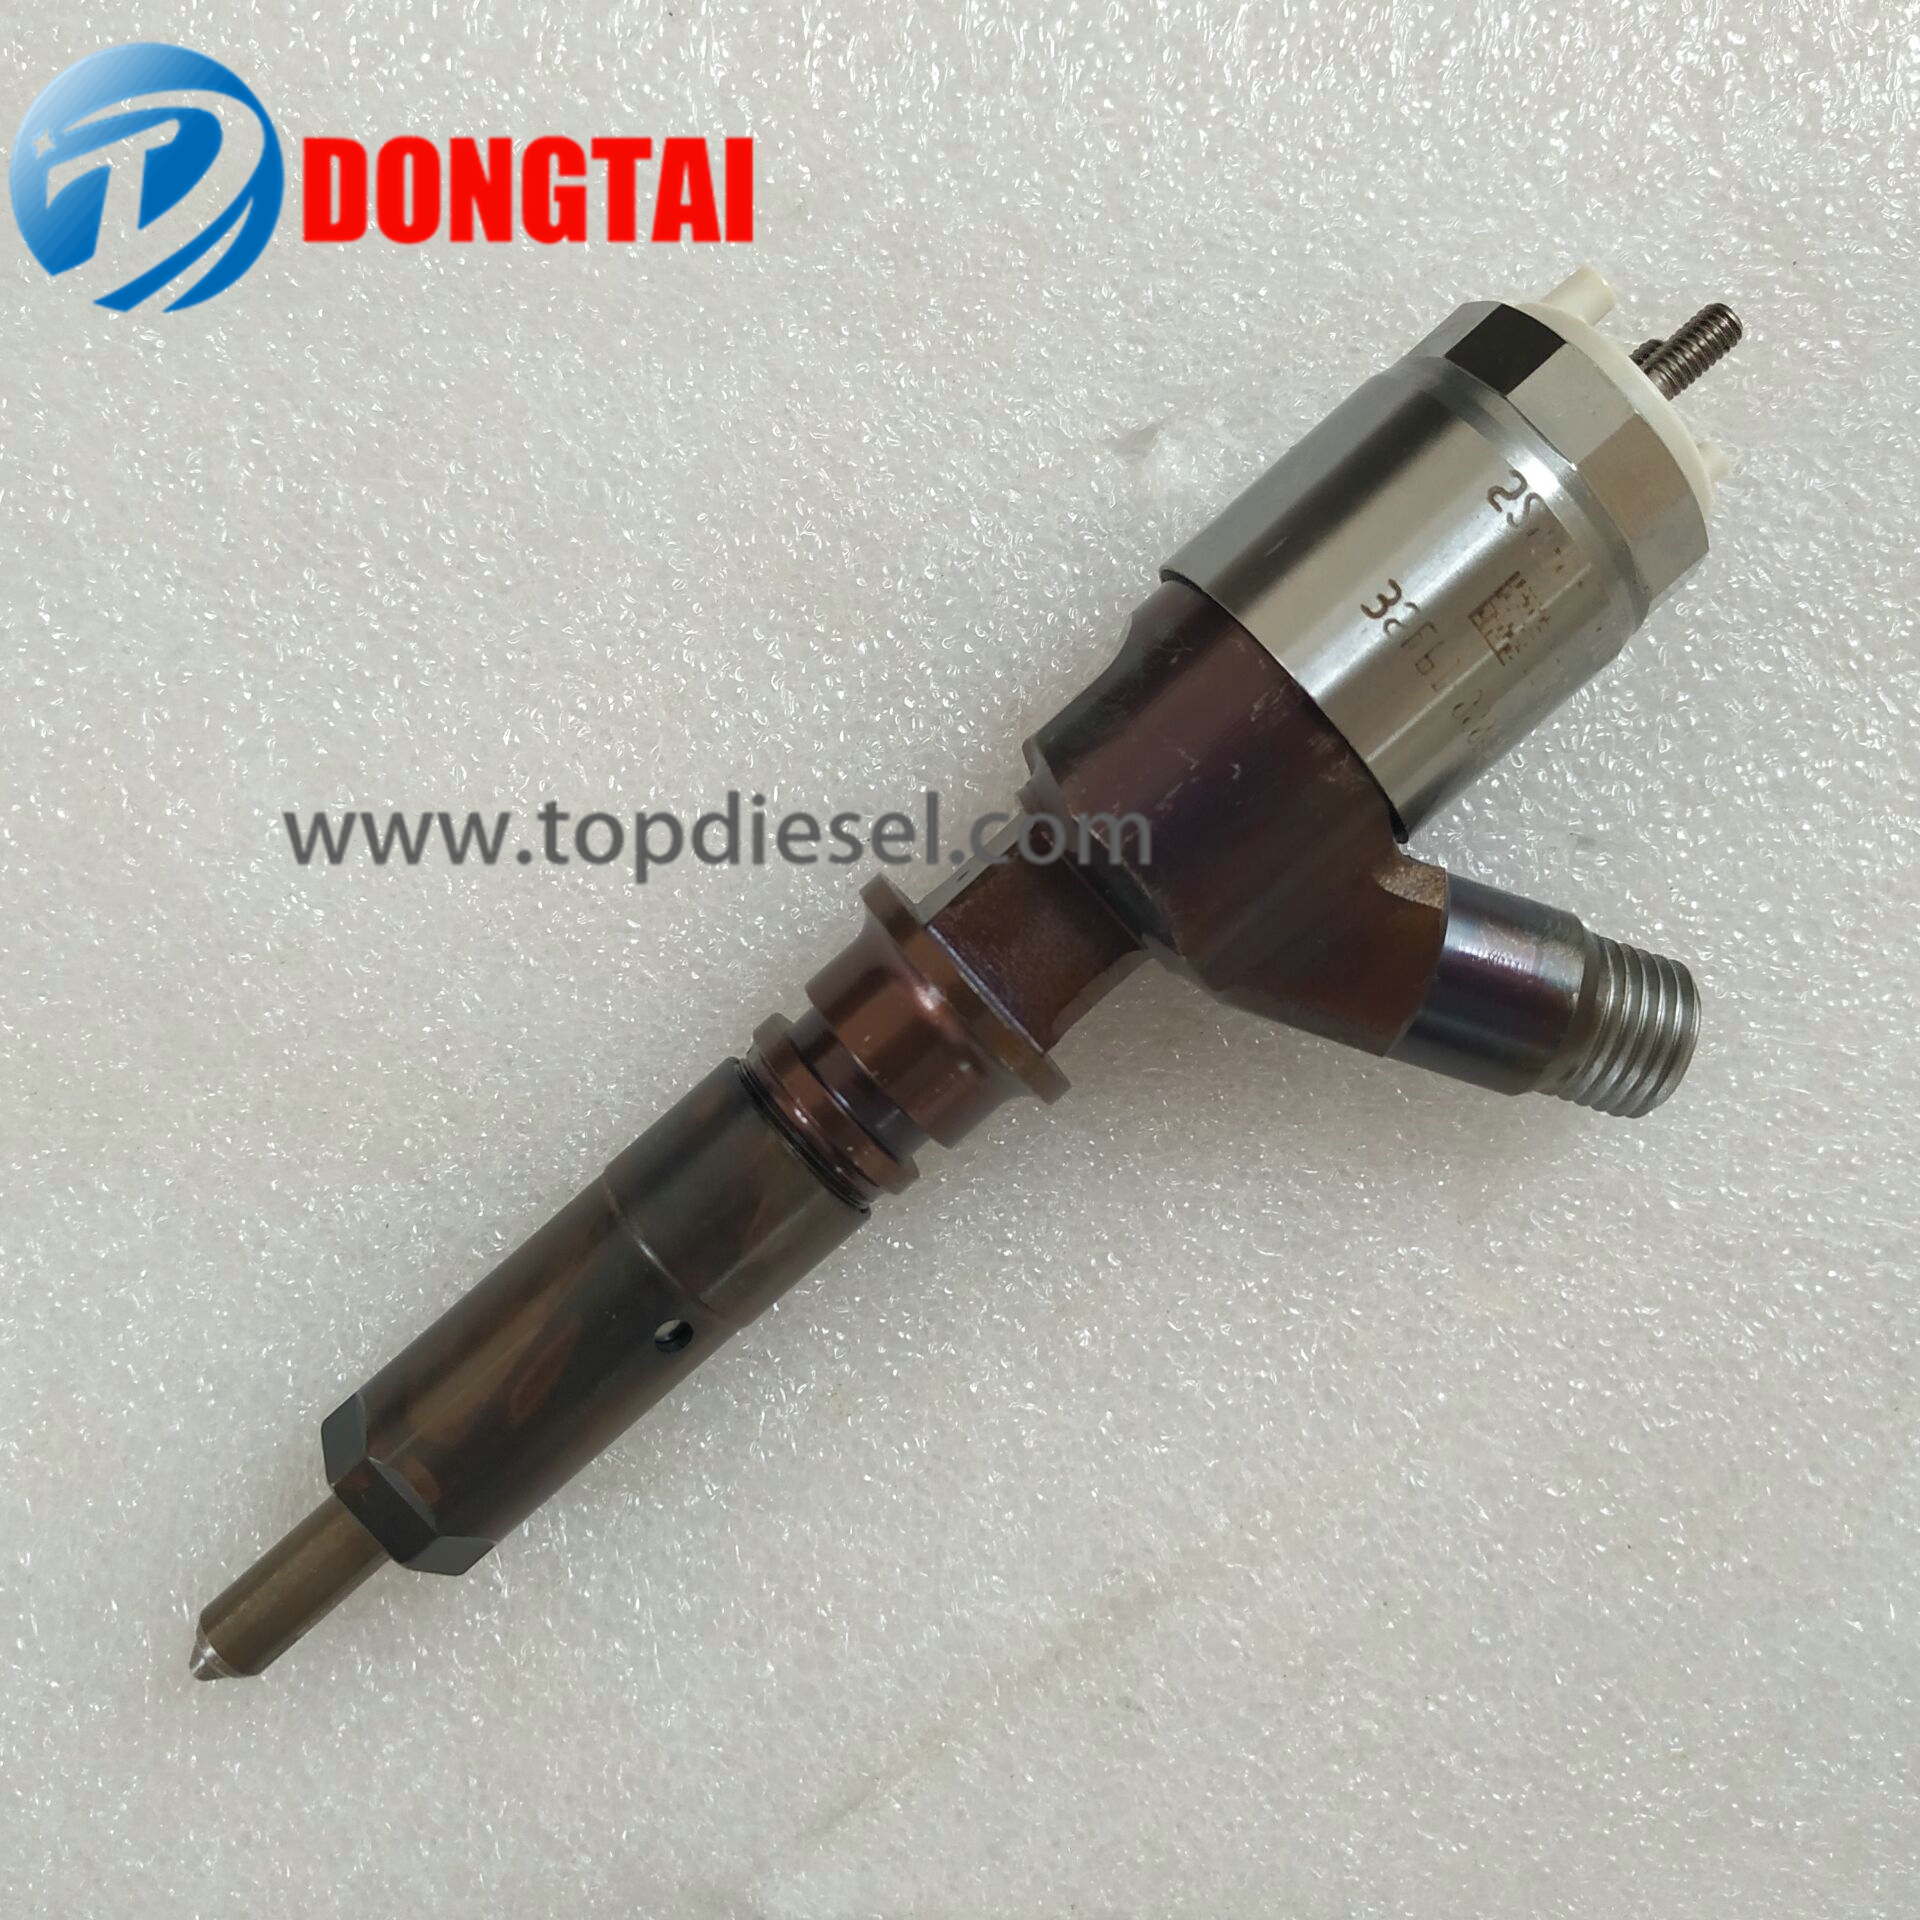 100% Original Factory Oil Burner Nozzle Cleaning Machine - 321-3600 Cat Injector – Dongtai